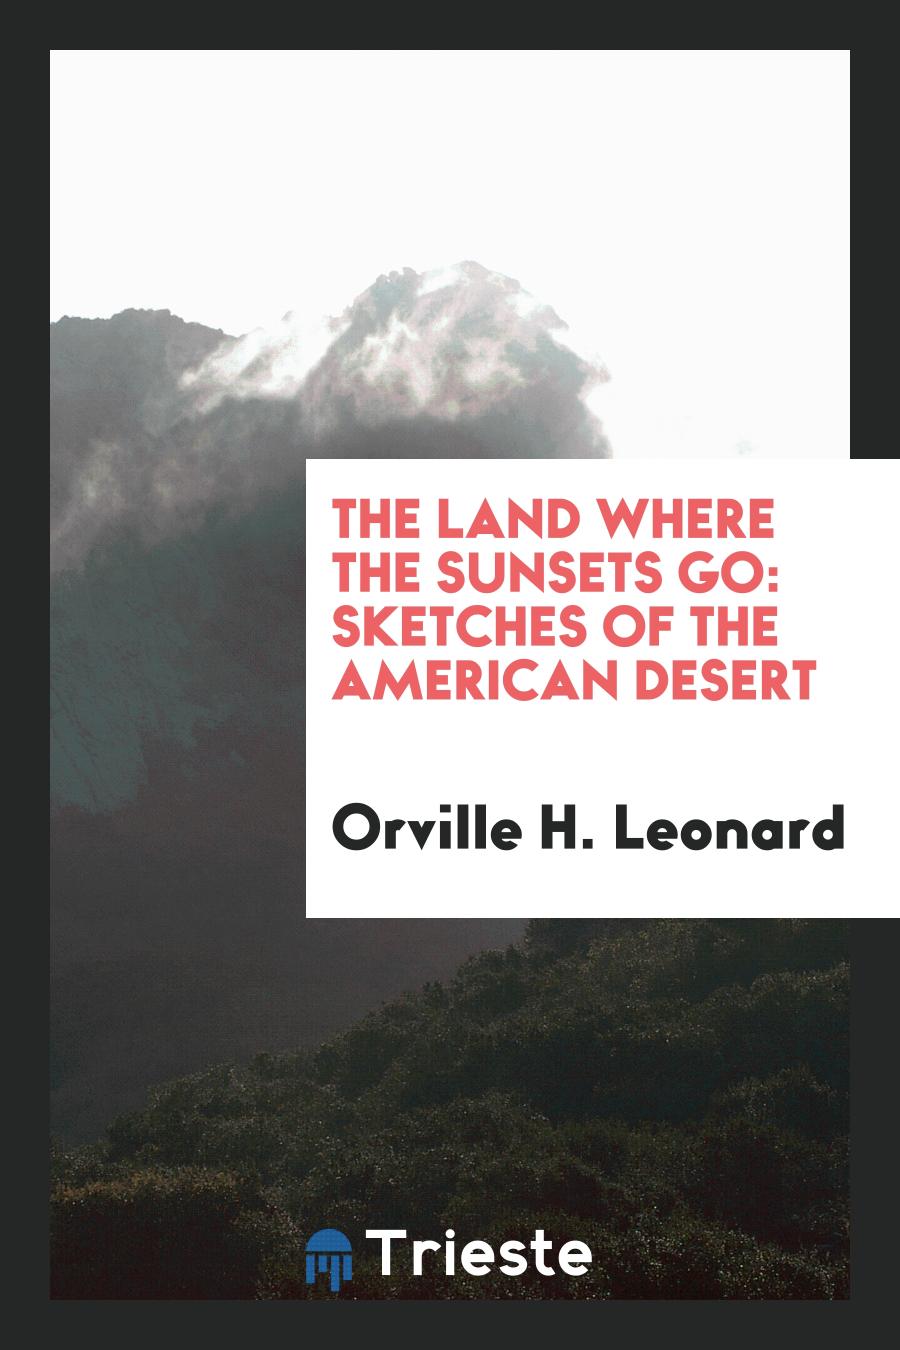 The Land where the Sunsets Go: Sketches of the American Desert